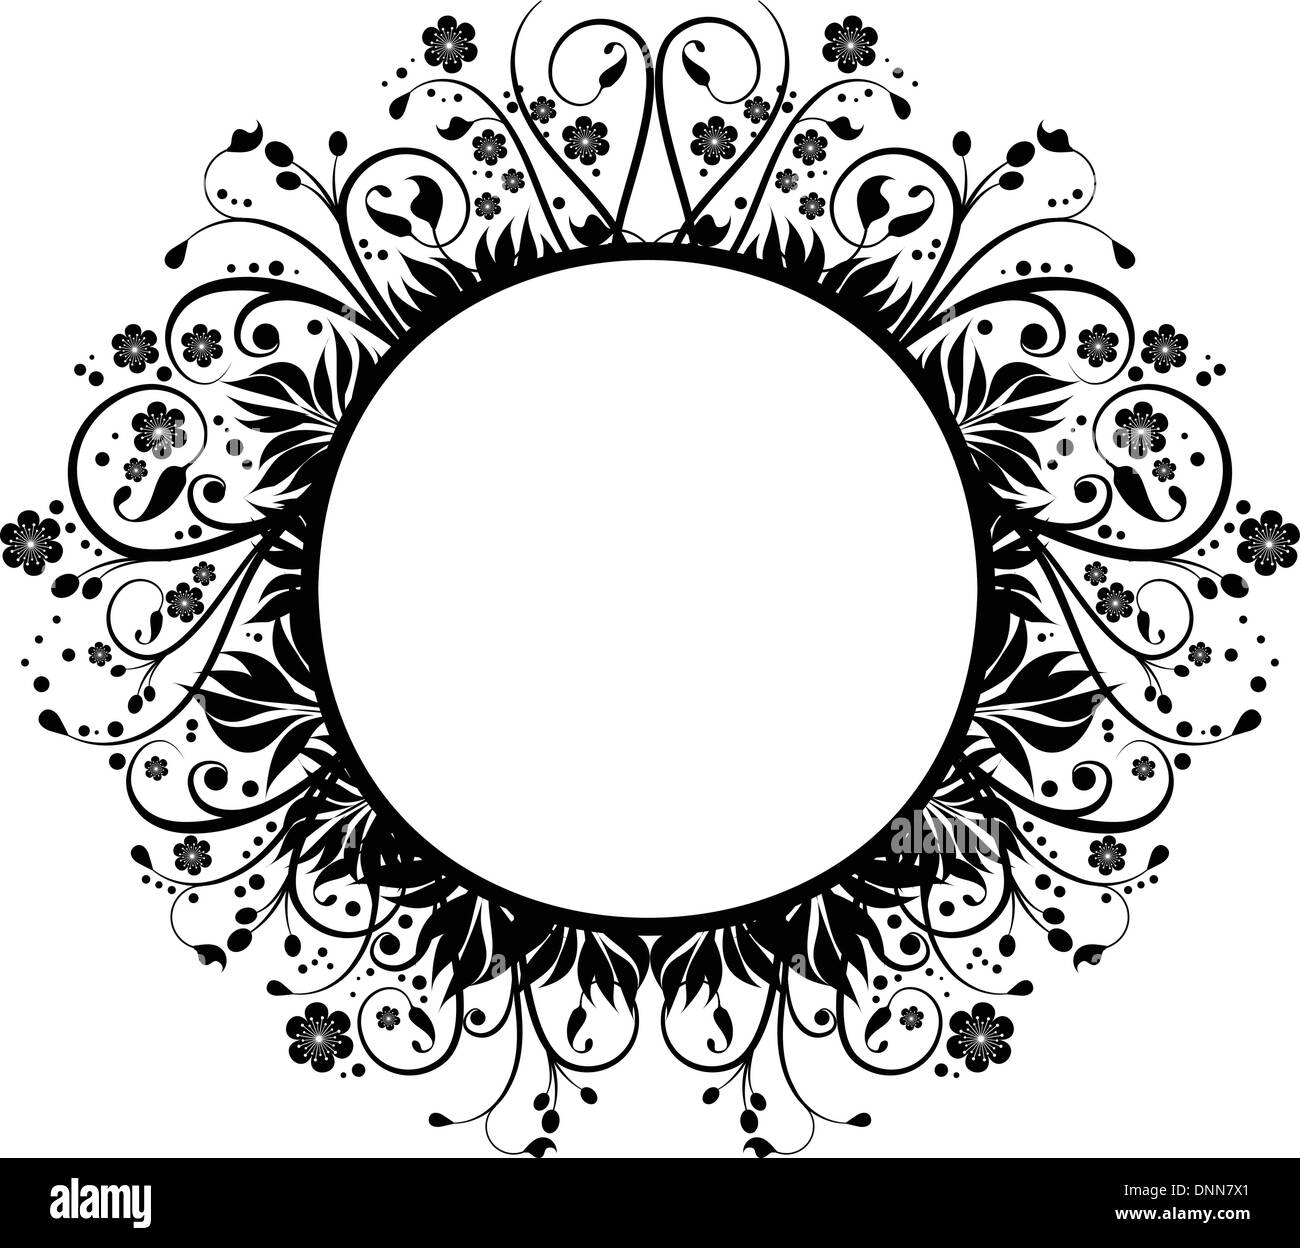 Decorative abstract floral background Stock Vector